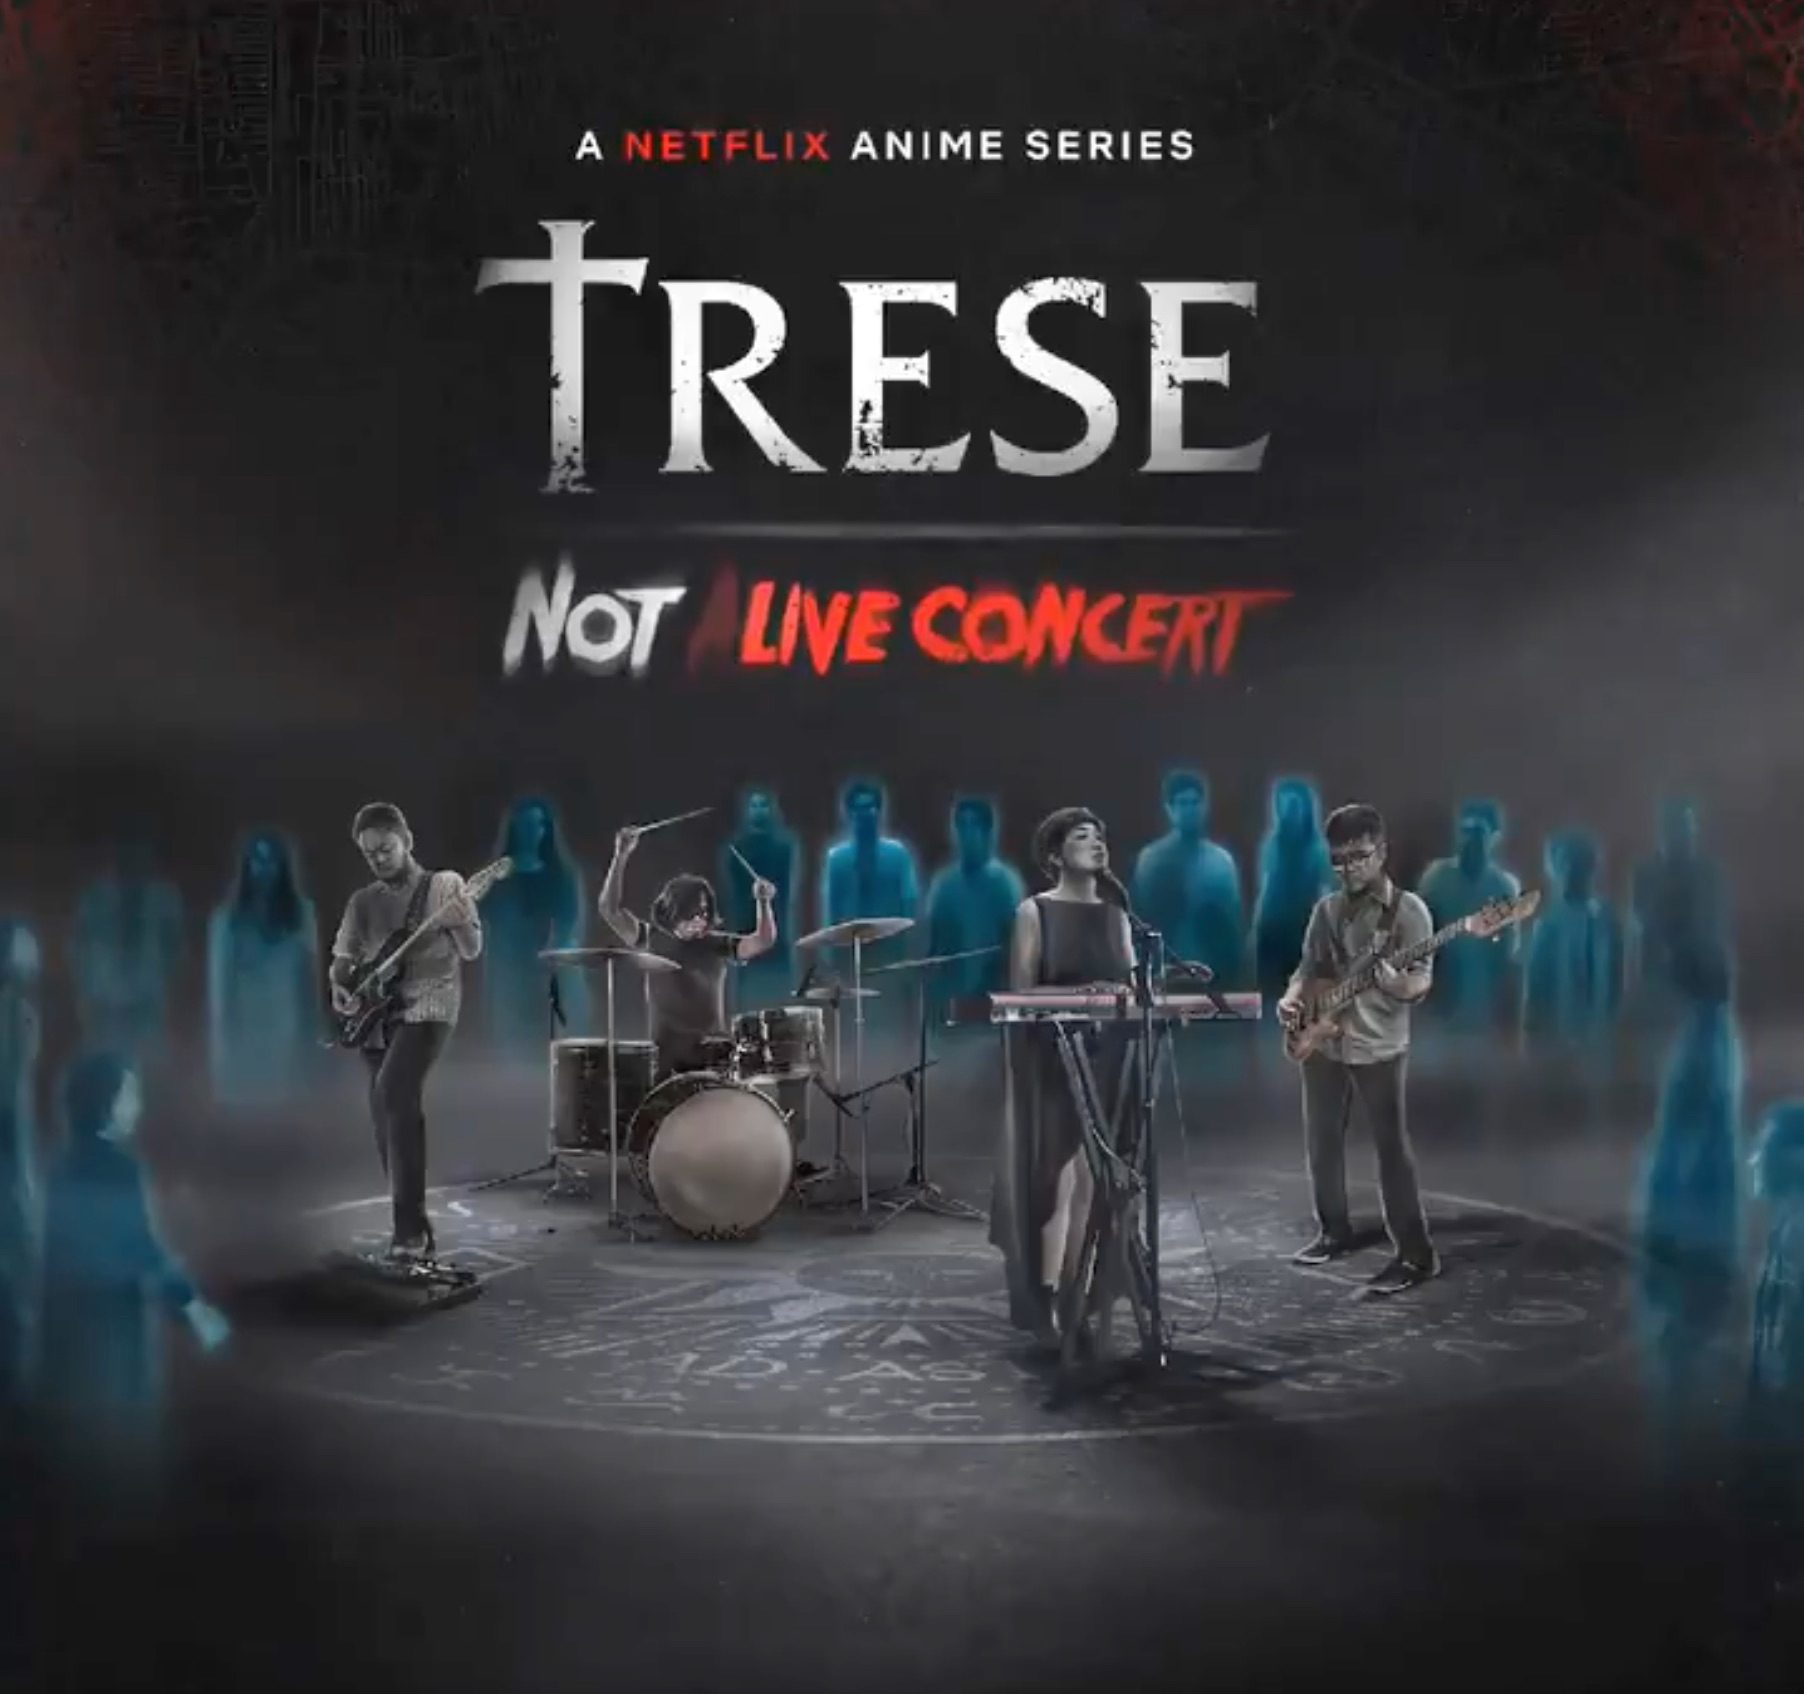 UDD to perform in ‘Not ALive Concert’ for ‘Trese’ launch